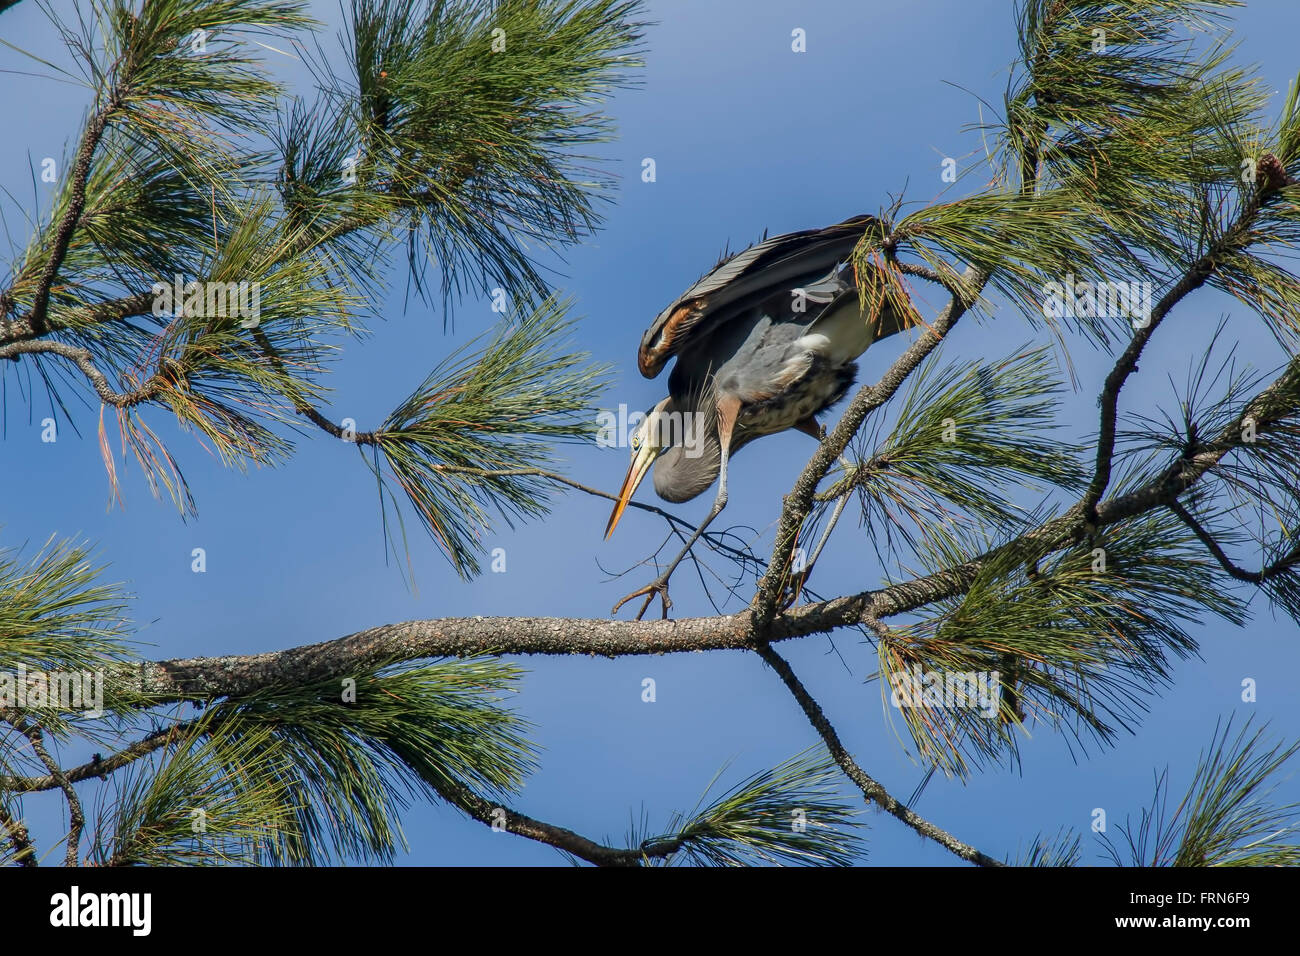 Heron on branch with stick. Stock Photo